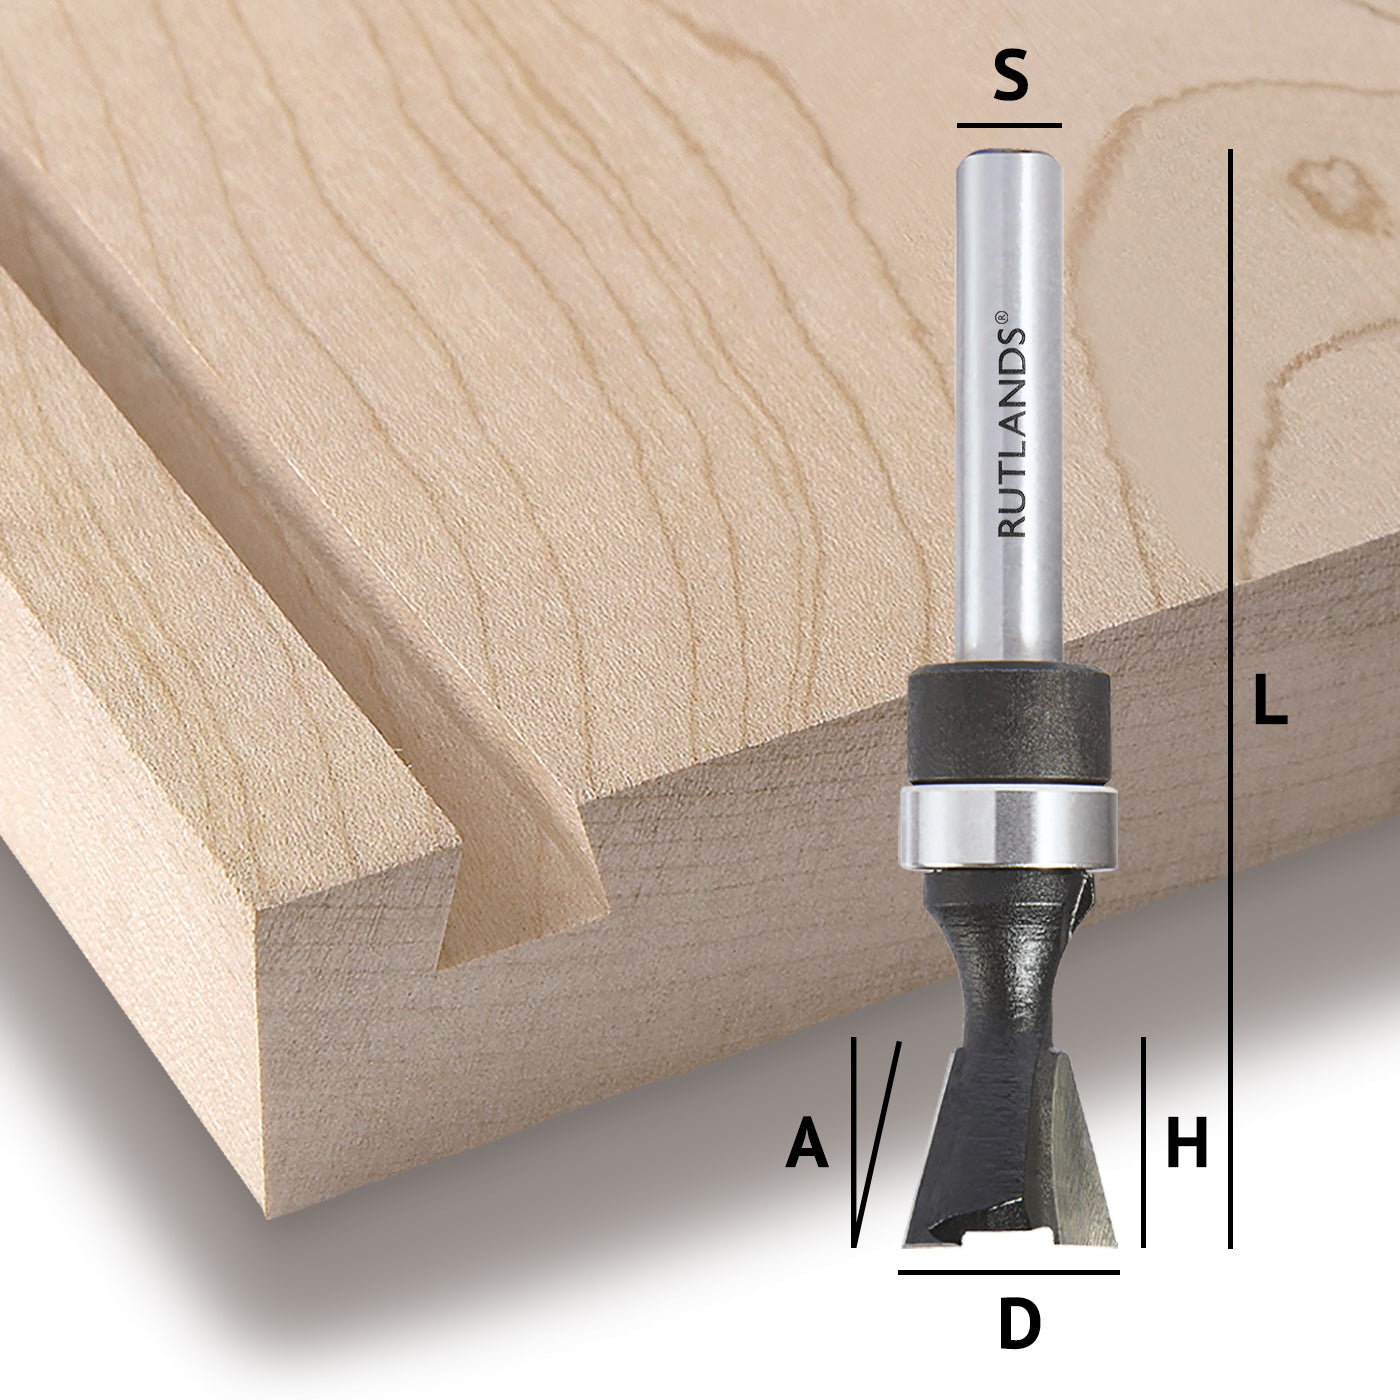 Router Bit - Dovetail with Bearing